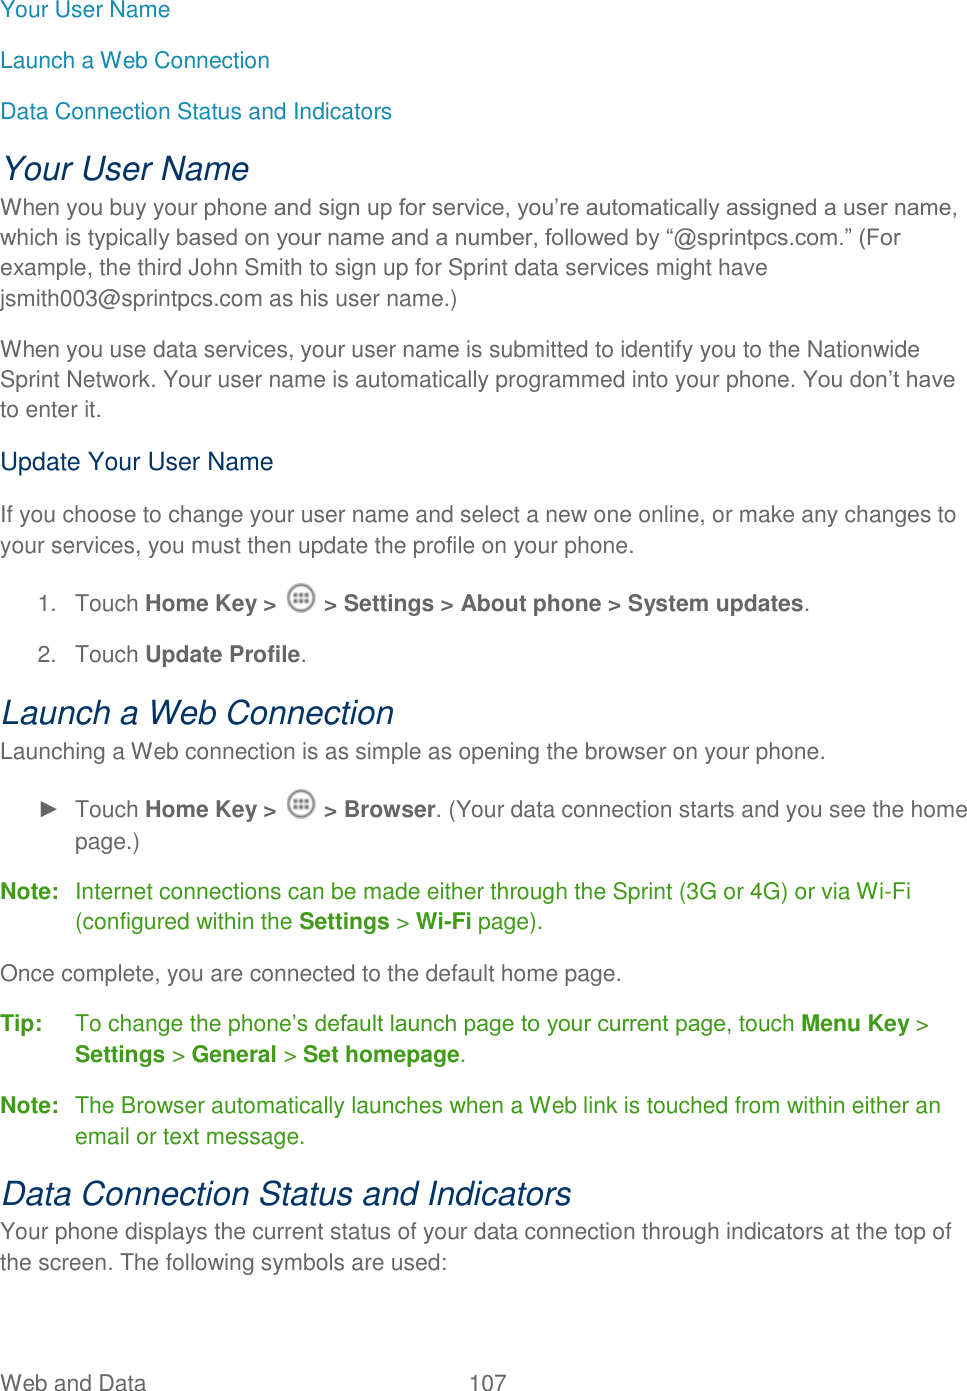 Web and Data  107   Your User Name Launch a Web Connection Data Connection Status and Indicators Your User Name When you buy your phone and sign up for service, you‟re automatically assigned a user name, which is typically based on your name and a number, followed by “@sprintpcs.com.” (For example, the third John Smith to sign up for Sprint data services might have jsmith003@sprintpcs.com as his user name.) When you use data services, your user name is submitted to identify you to the Nationwide Sprint Network. Your user name is automatically programmed into your phone. You don‟t have to enter it. Update Your User Name If you choose to change your user name and select a new one online, or make any changes to your services, you must then update the profile on your phone. 1.  Touch Home Key &gt;   &gt; Settings &gt; About phone &gt; System updates.  2.  Touch Update Profile. Launch a Web Connection  Launching a Web connection is as simple as opening the browser on your phone. ►  Touch Home Key &gt;   &gt; Browser. (Your data connection starts and you see the home page.) Note:  Internet connections can be made either through the Sprint (3G or 4G) or via Wi-Fi (configured within the Settings &gt; Wi-Fi page). Once complete, you are connected to the default home page.   Tip:  To change the phone‟s default launch page to your current page, touch Menu Key &gt; Settings &gt; General &gt; Set homepage. Note:  The Browser automatically launches when a Web link is touched from within either an email or text message. Data Connection Status and Indicators Your phone displays the current status of your data connection through indicators at the top of the screen. The following symbols are used: 